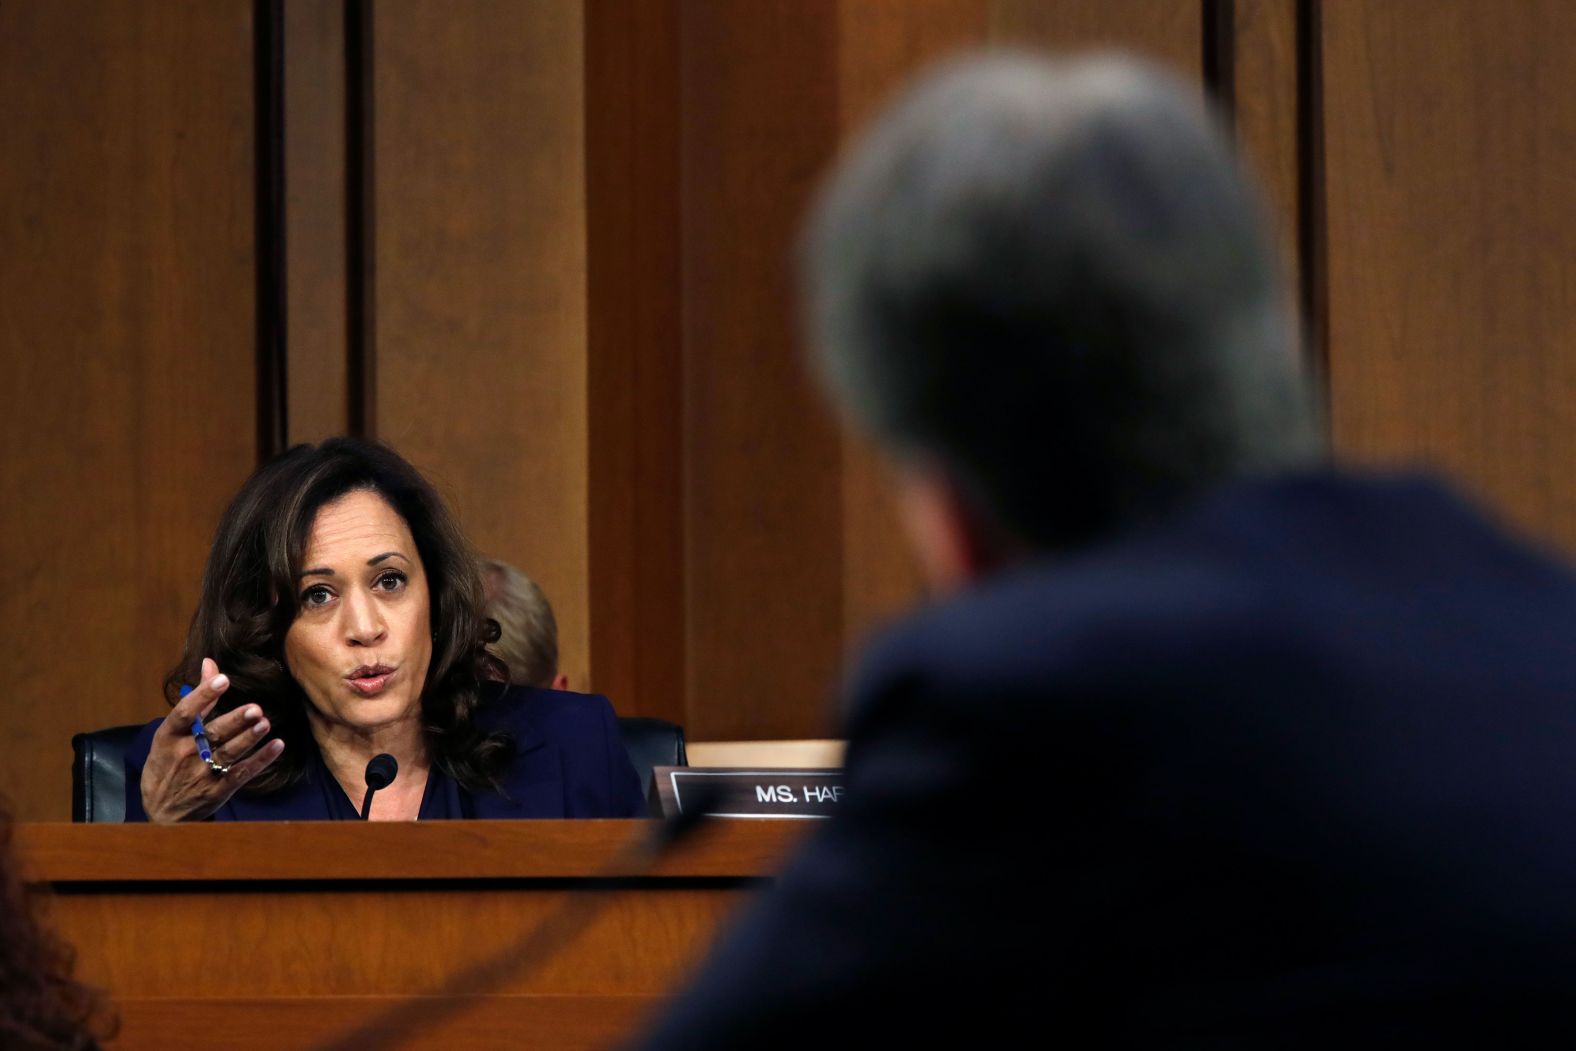 Sen. Kamala Harris questions Kavanaugh on Wednesday. <a href="index.php?page=&url=https%3A%2F%2Fwww.cnn.com%2F2018%2F09%2F06%2Fpolitics%2Fkamala-harris-brett-kavanaugh-hearing%2Findex.html" target="_blank">The Democrat pressed Kavanaugh</a> about whether he had discussed special counsel Robert Mueller's investigation with anyone. After answering "with other judges I know," Kavanaugh was asked if he had discussed the probe with anyone who works at Kasowitz Benson Torres, the New York law firm founded by President Donald Trump's personal attorney Marc Kasowitz. Kavanaugh replied that he's unsure he knows everyone who works at that law firm and asked the senator if there was a specific person she was talking about.